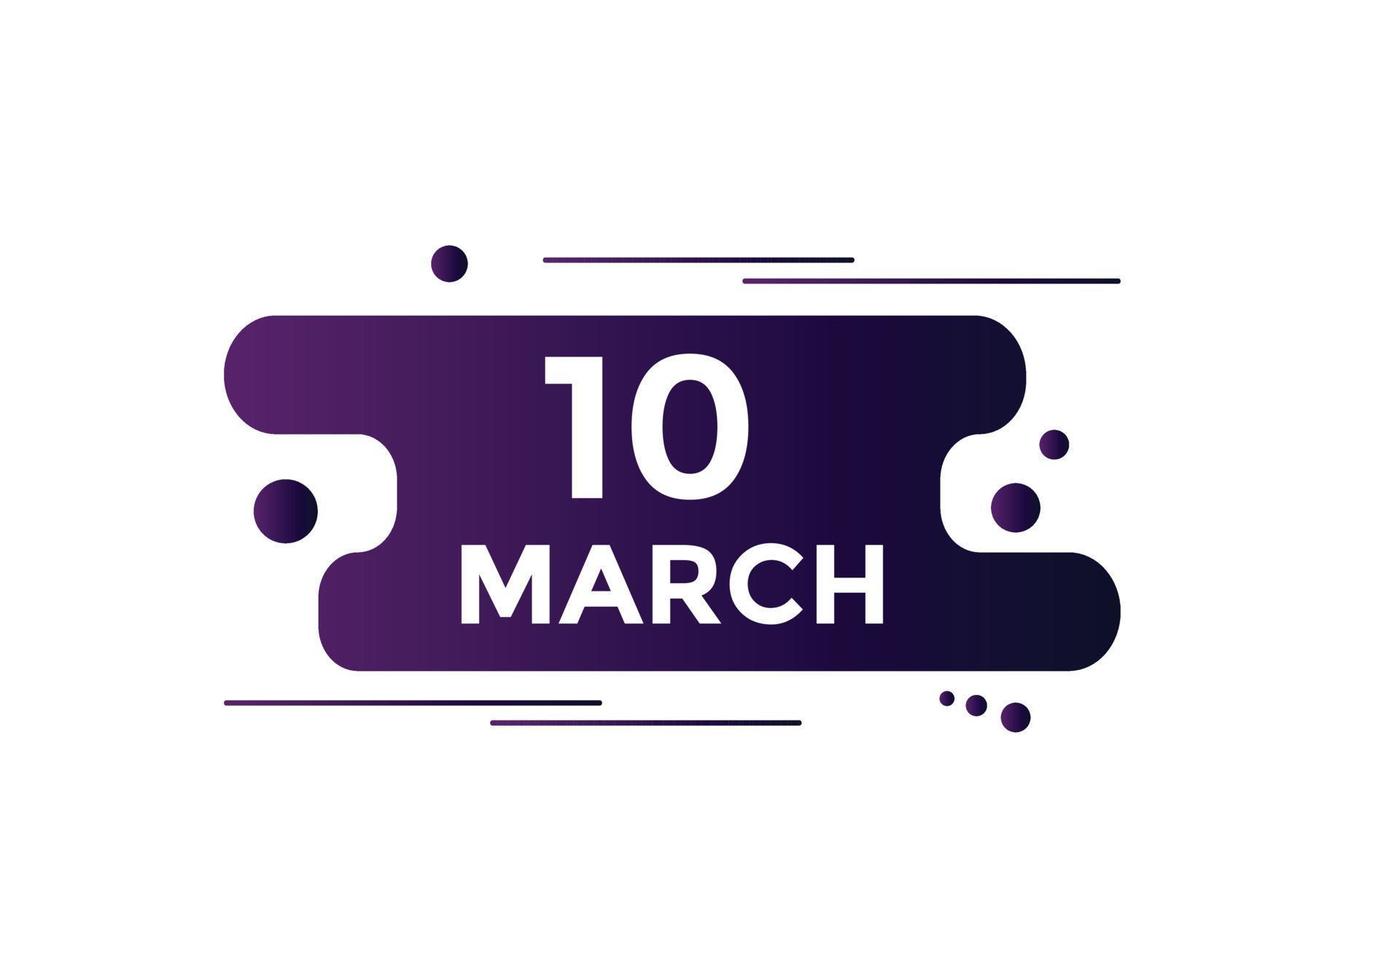 march 10 calendar reminder. 10th march daily calendar icon template. Calendar 10th march icon Design template. Vector illustration